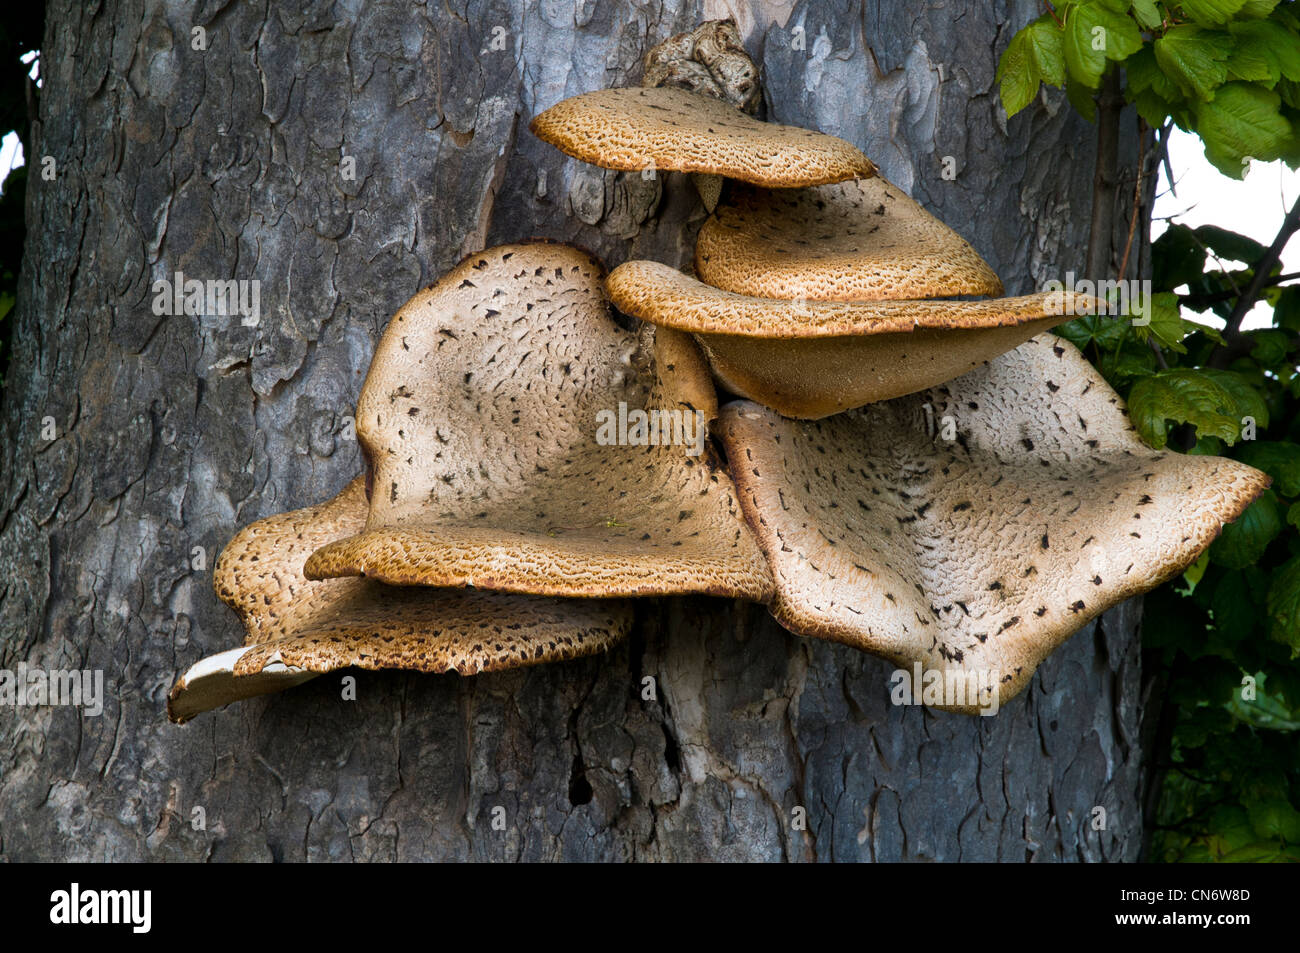 A very large dryad's saddle fungus (Polyporus squamosus) growing on a tree near Alnwick, Northumberland. May. Stock Photo